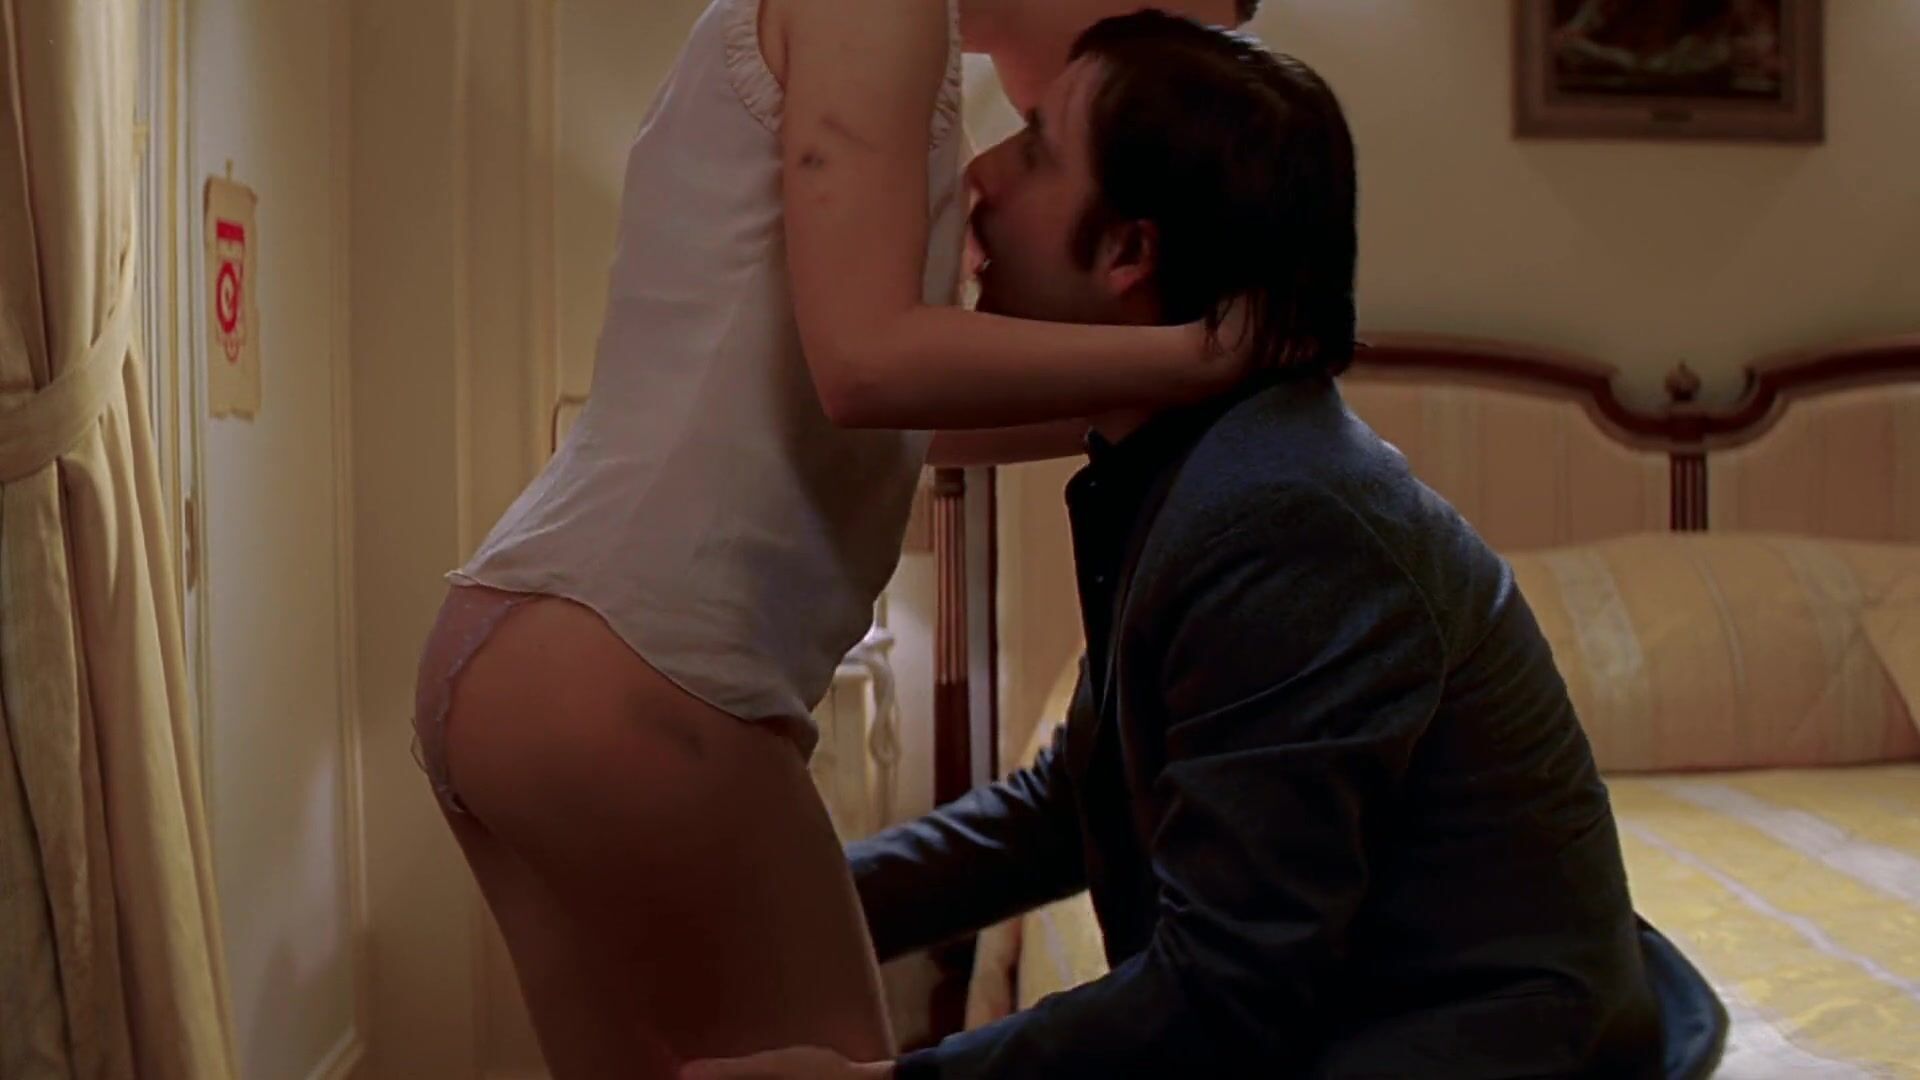 Grandma Sexy actress Natalie Portman gives herself to mustachioed guy in Hotel Chevalier (2007) Foot Job